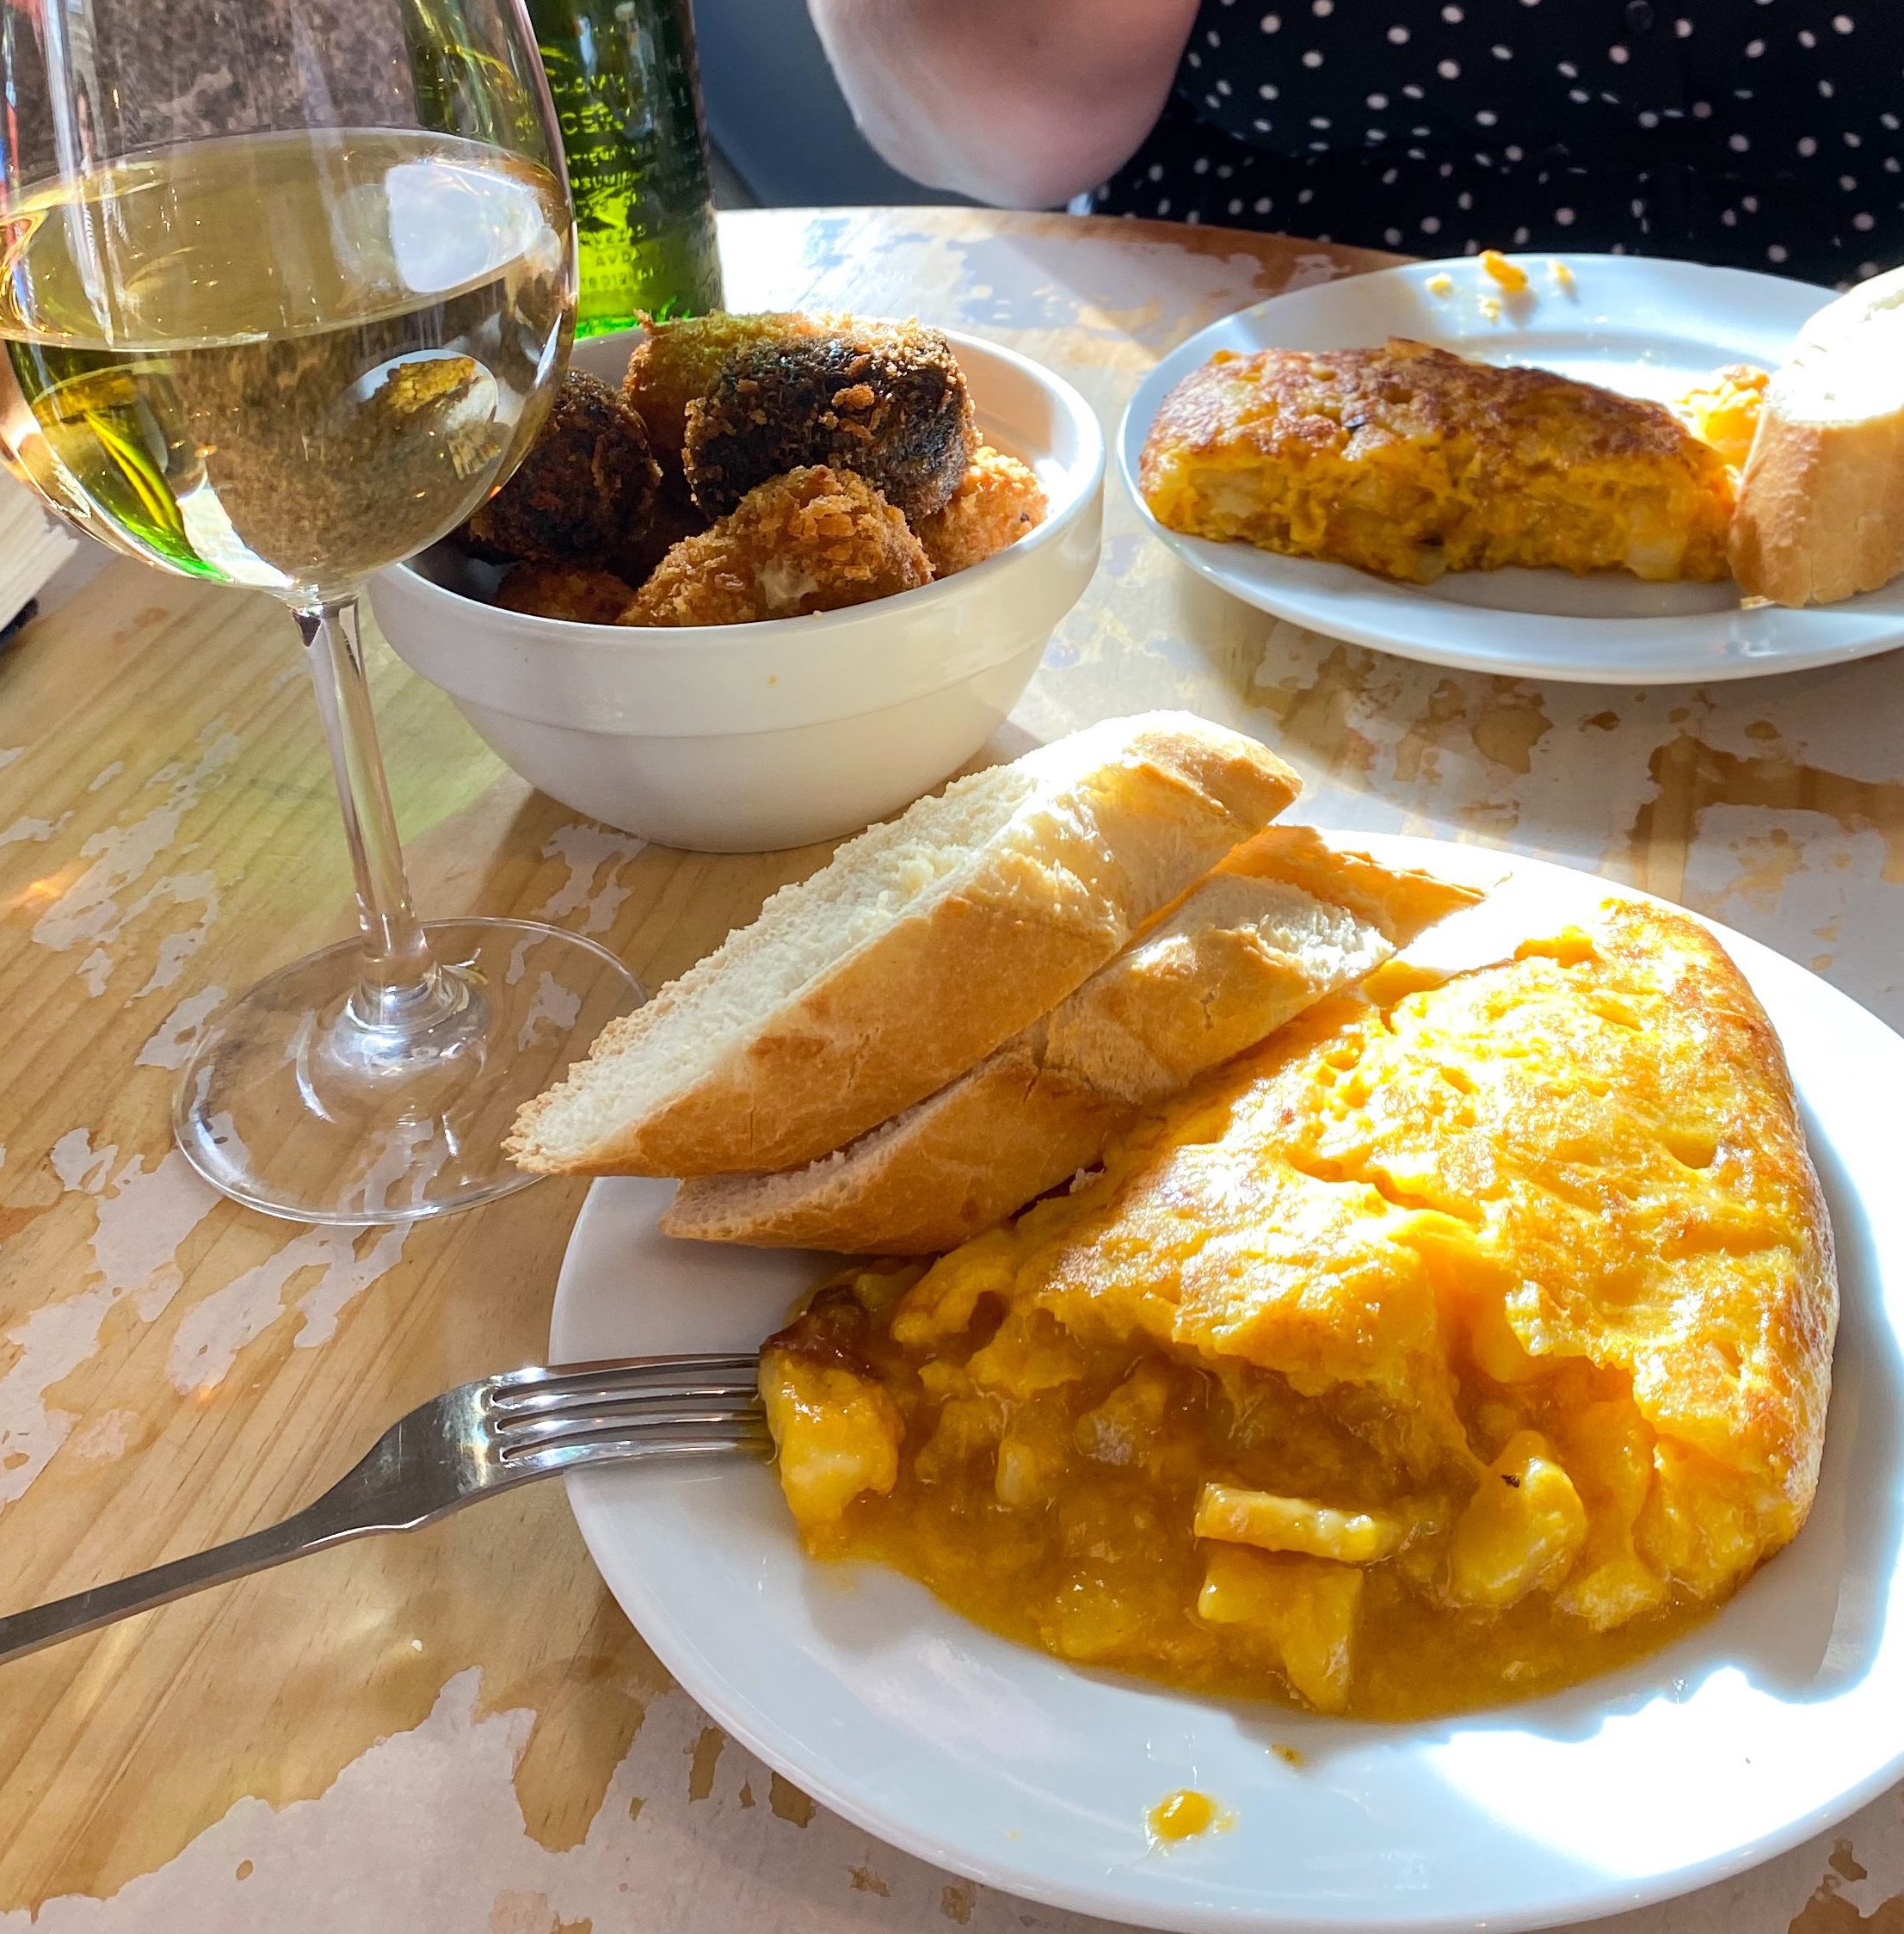 A table with plates of spanish omelette and bread, a bowl of croquettes and some alcoholic drinks.